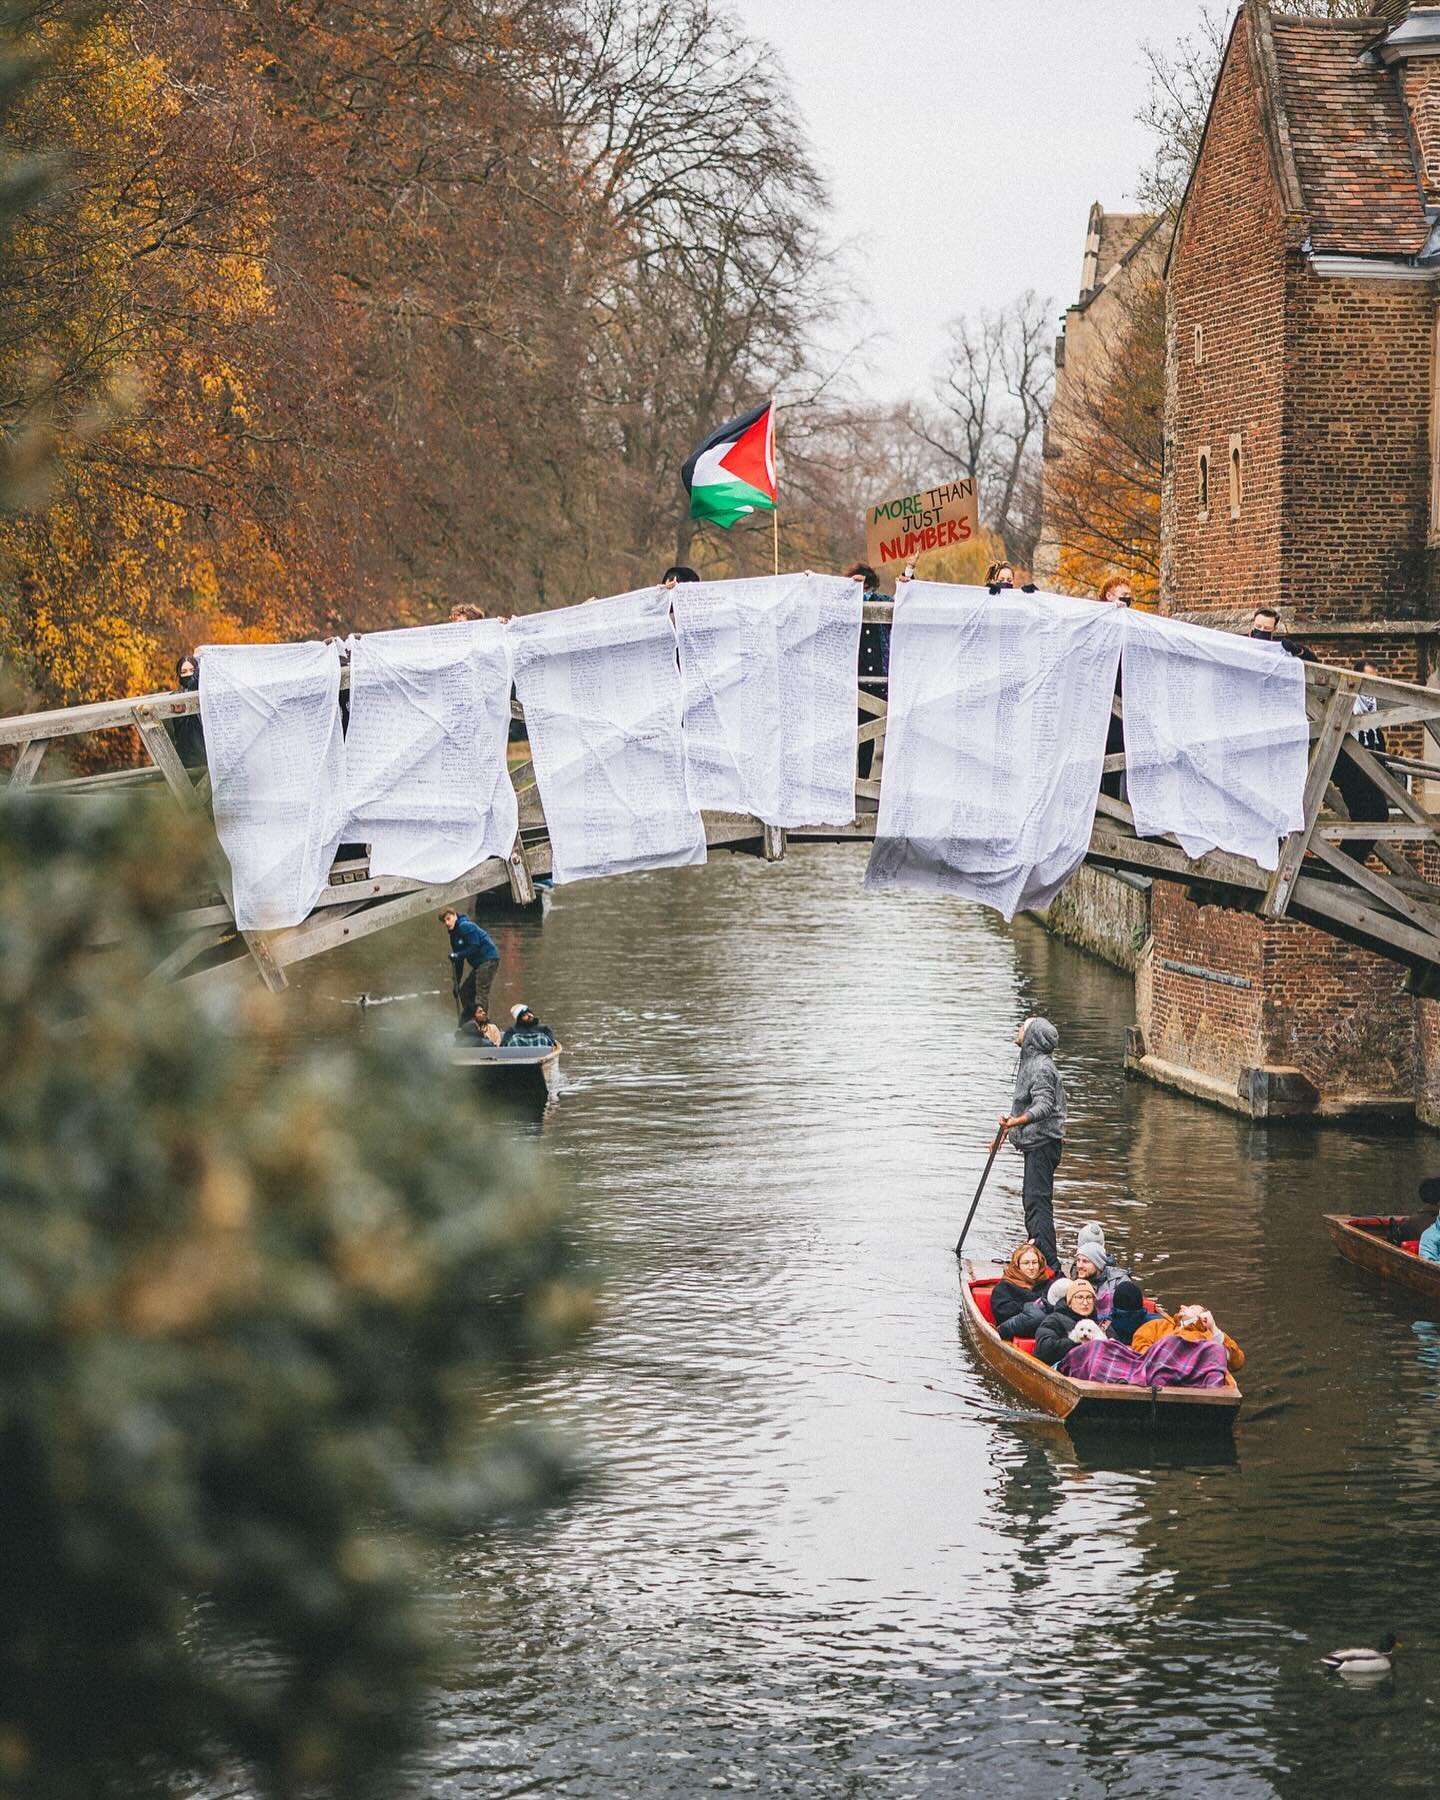 &quot;Cambridge students mark the second day of truce by displaying the written names of thousands of Gazan martyrs over the historical Mathematical Bridge. They aimed to ask for a permanent ceasefire and an end to Israeli apartheid, as well as for t